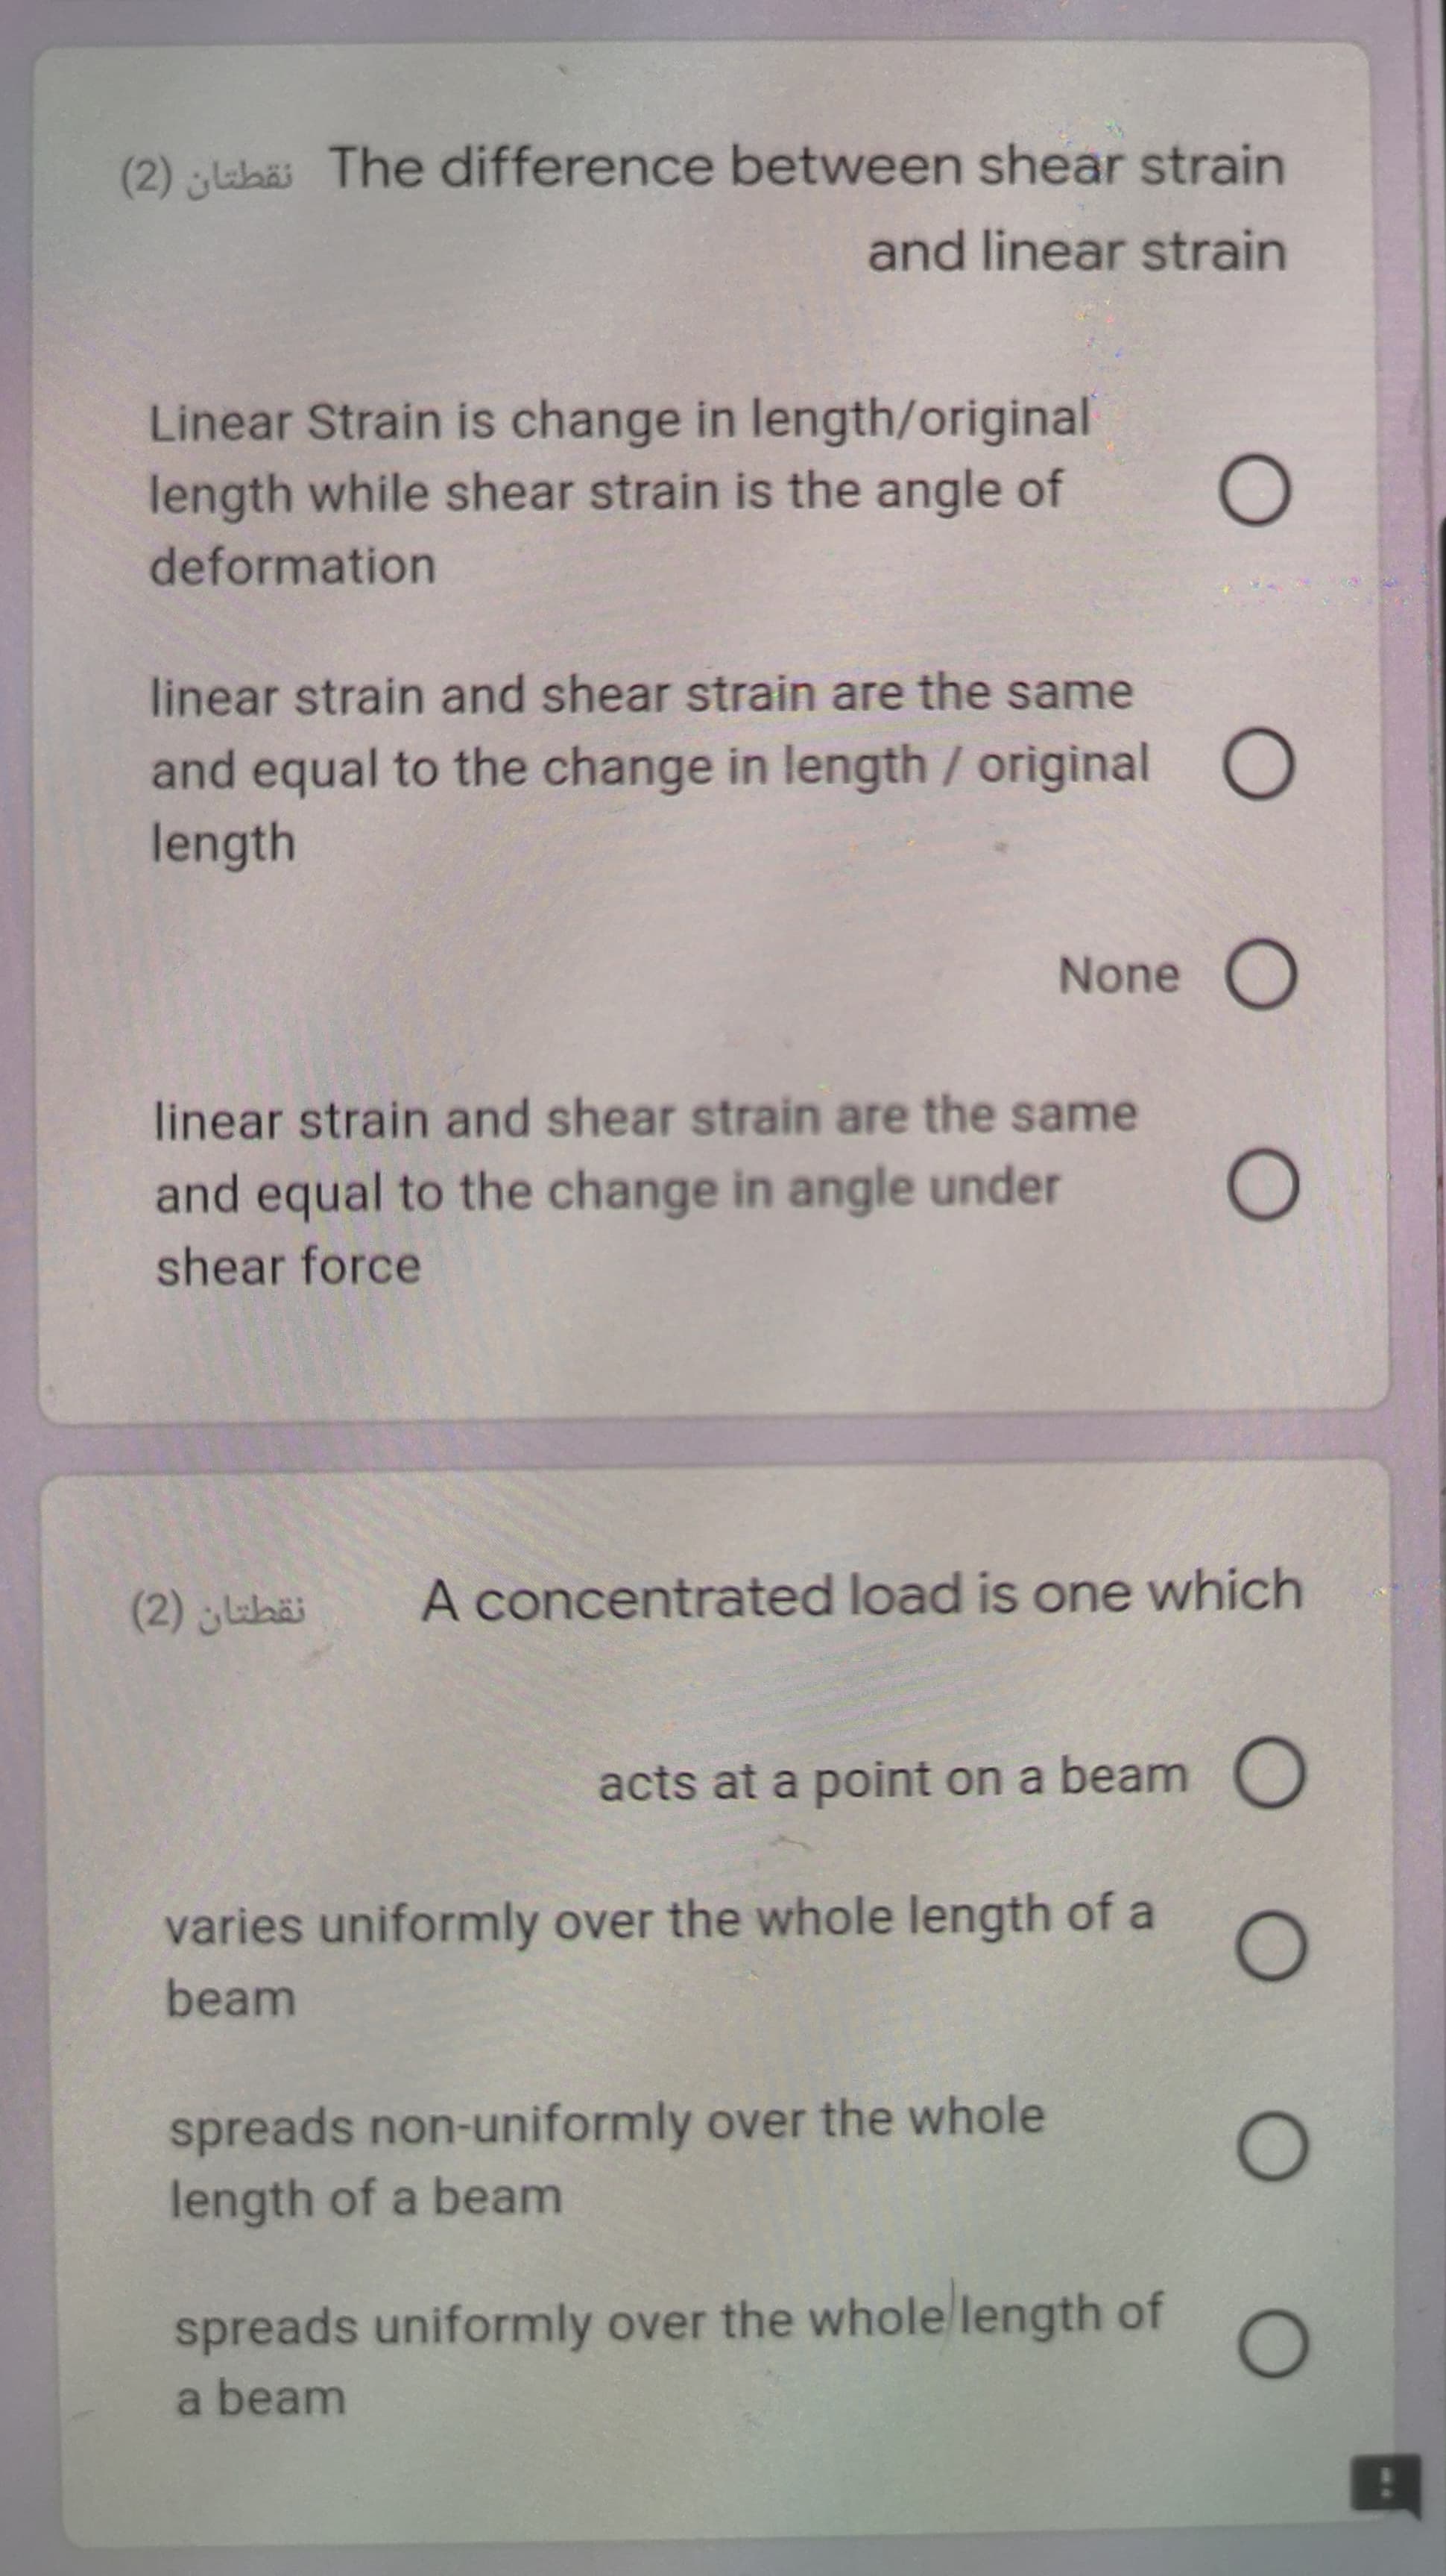 (2) luhai The difference between shear strain
and linear strain
